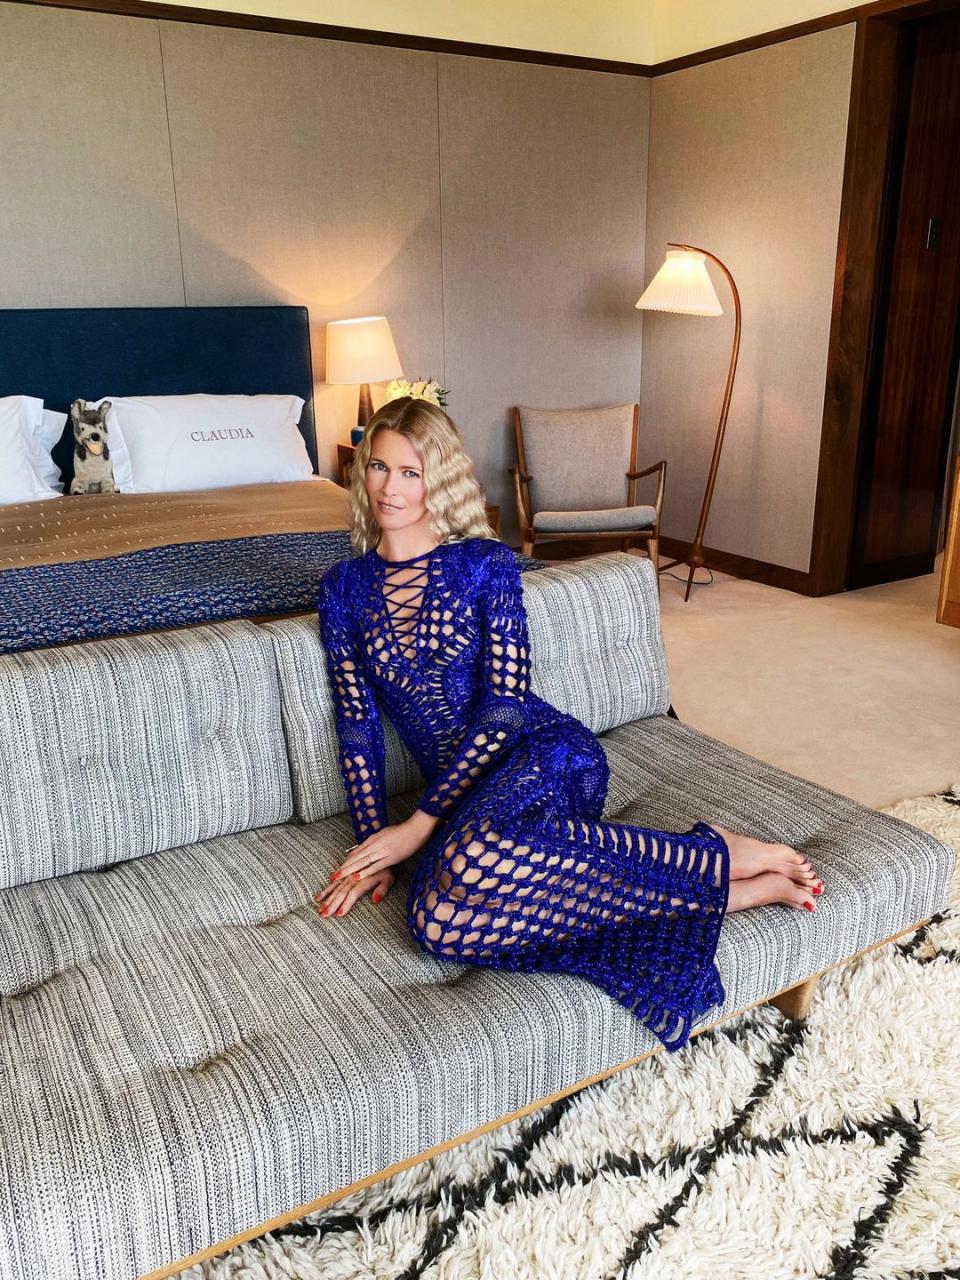 <p>"The first time I met Olivier Rousteing was on a rainy Sunday in uptown New York for the Balmain SS16 campaign shot by Steven Klein. It was a great shoot and I loved working with him, so I was so excited to have my favourite dress from that collection, which I’m wearing here, re-issued and handmade in electric blue crystals to celebrate my 50th birthday. I have great memories of that shoot and I loved working with Olivier. I love his unique combination of boyish charm and prodigious talent. He marries professionalism and a quiet, calm confidence with hard work, ambition and sincerity. He’s also very funny and his positive energy and his enthusiasm is infectious. Other brands such as Dolce & Gabbana, Isabel Marant and Versace, as well as Bamford, Barbie, Frame and Lucie Kaas have also released limited-edition and one-off pieces in celebration of my birthday, launching this September and October. From a taste and style perspective to a shared ethos on embracing age, health and wellbeing, all these brands are very special to me, so I’m thrilled. Select items and sales will go towards a number of charities, from Unicef, for whom I’m a UK Ambassador, to Heads Together and Humanitas Ricercas."<br></p><p>Claudia wears a dress by Balmain, reissued specially for her 50th birthday.</p>